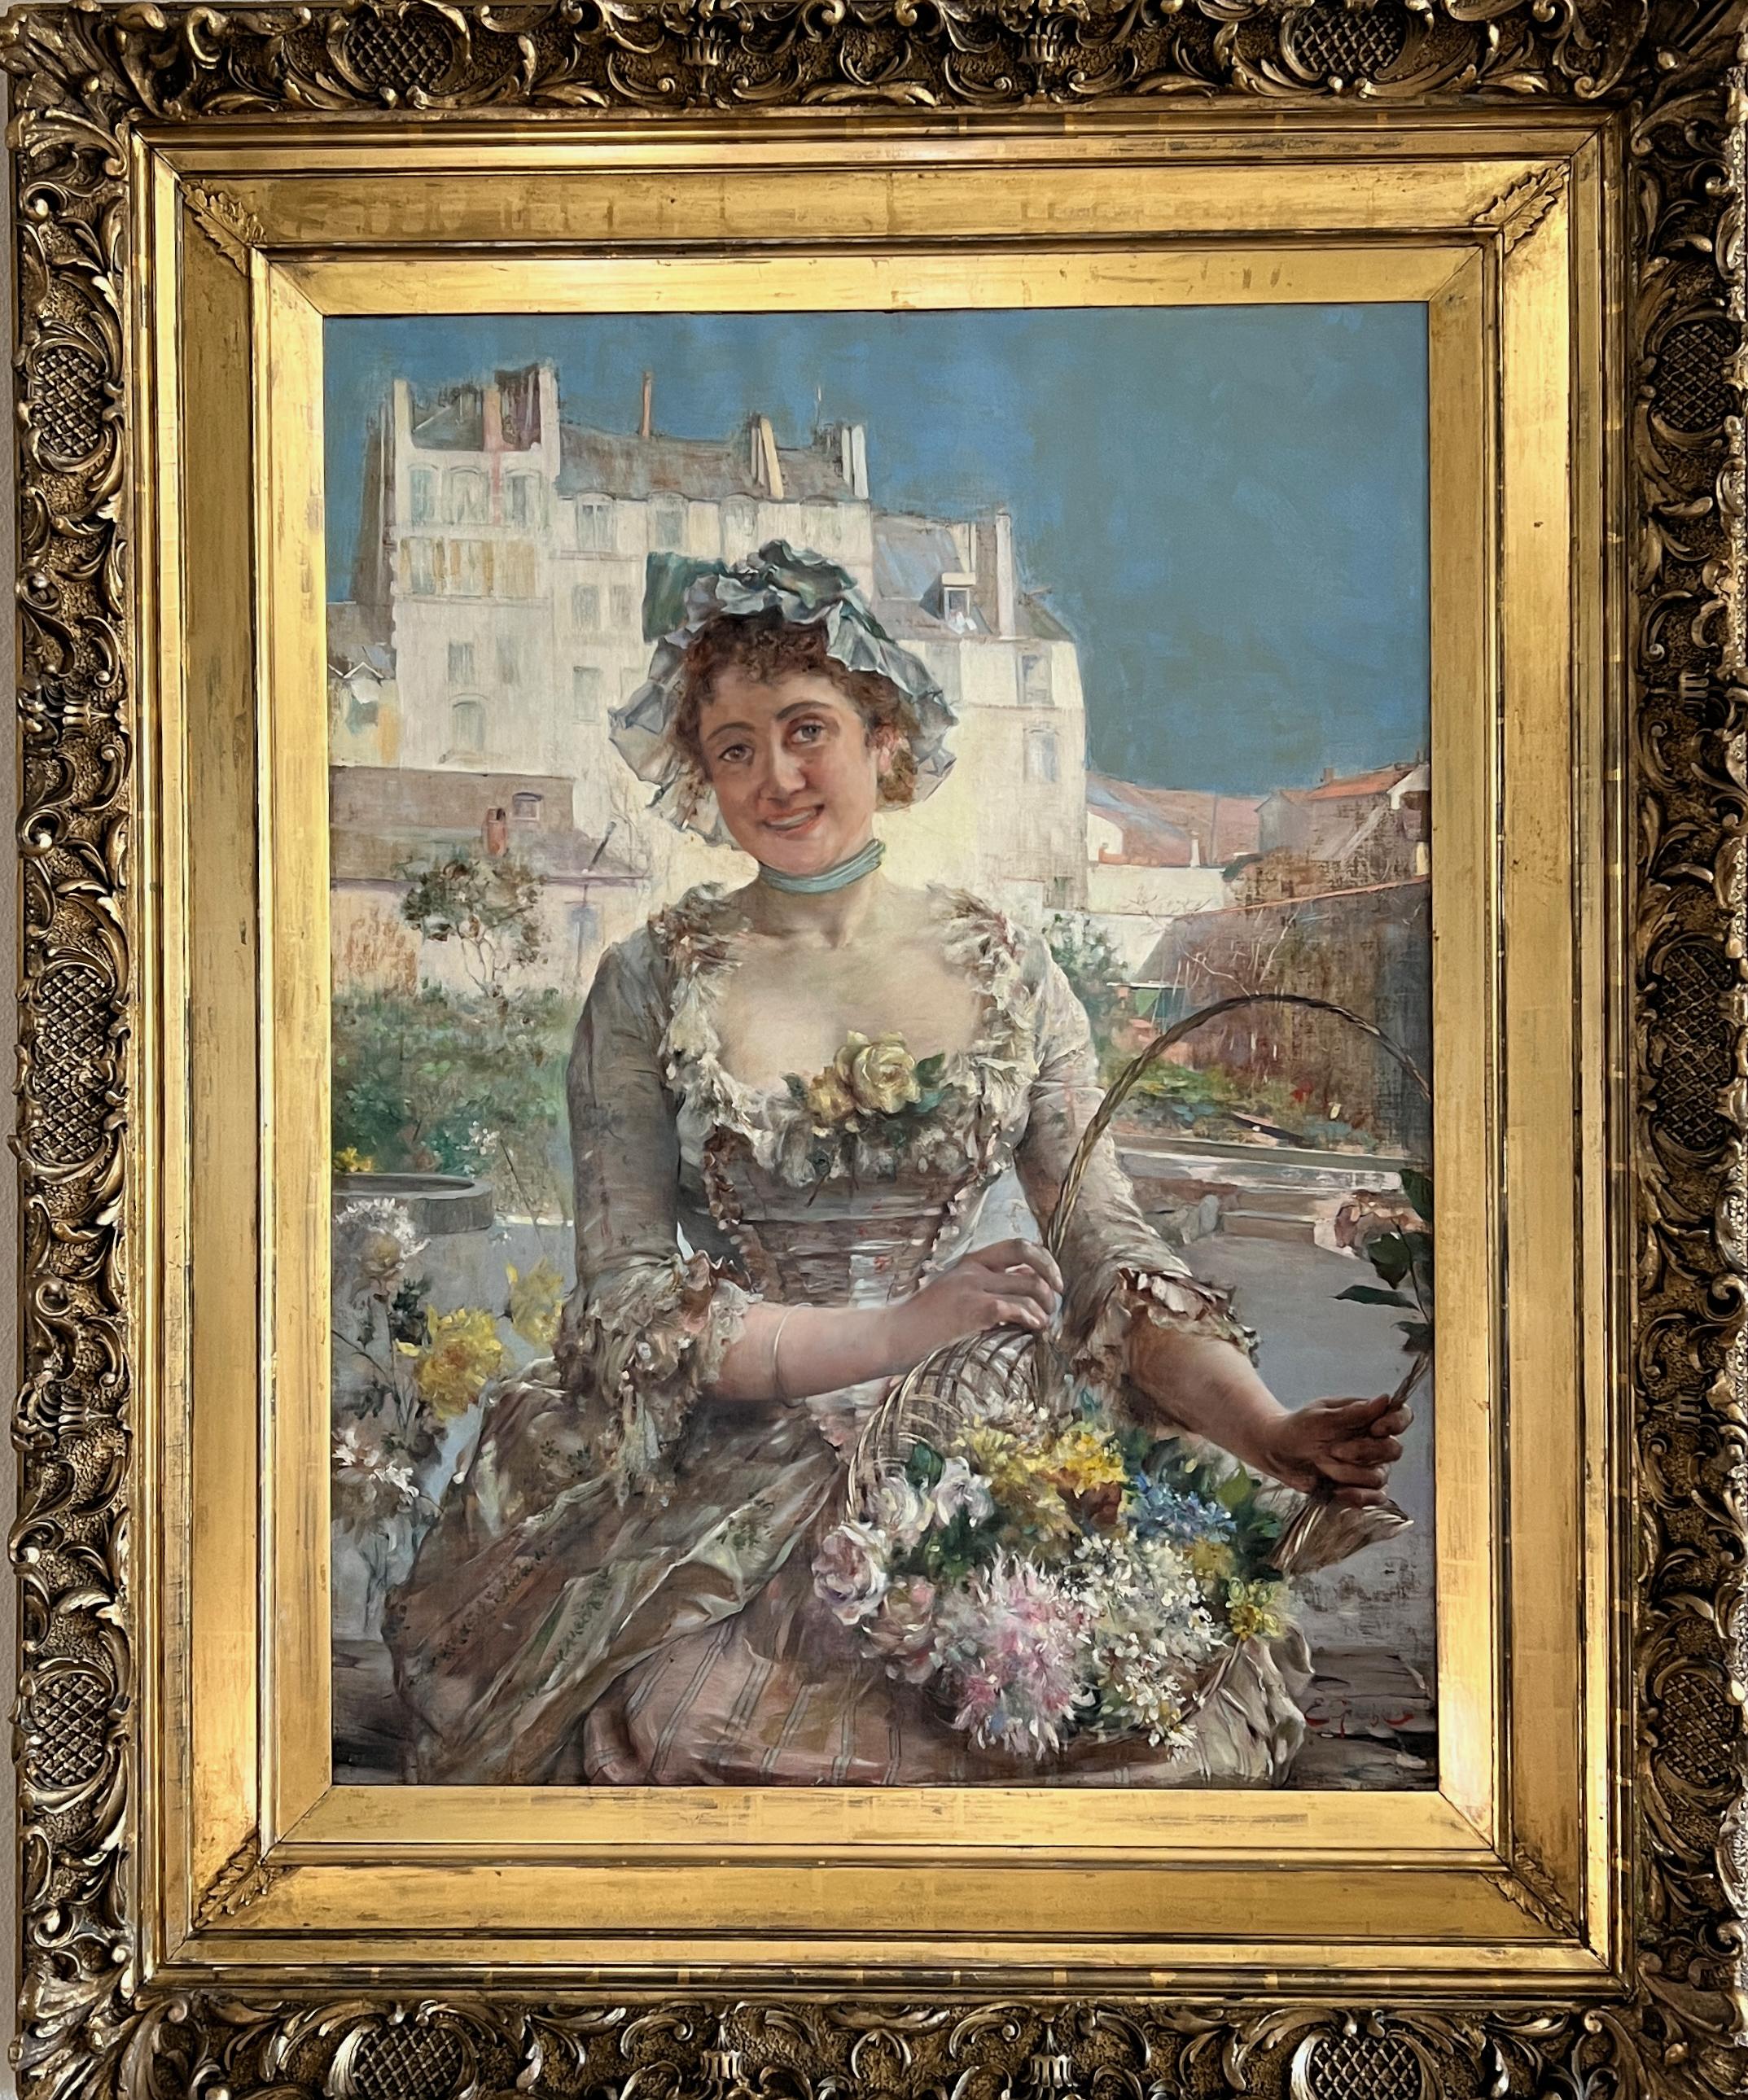 A wonderful painting by 19th century Italian artist E. Giachi. This large painting depicts an Italian flower girl wearing a beautiful dress carrying a basket of flowers in Italian town landscape. 